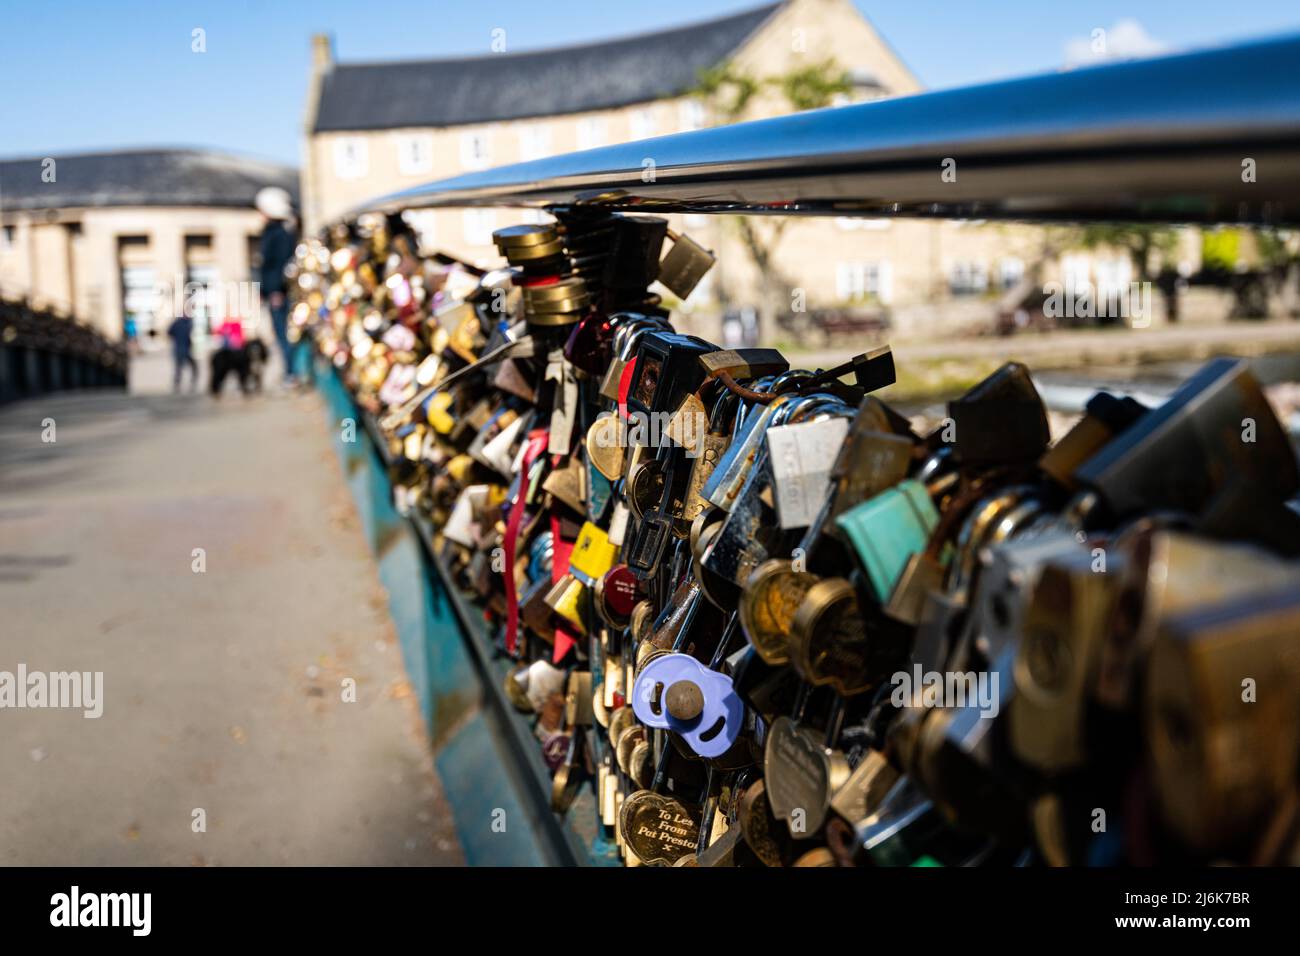 Love locks on a bridge over the River Wye at Bakewell, Derbyshire, UK Stock Photo